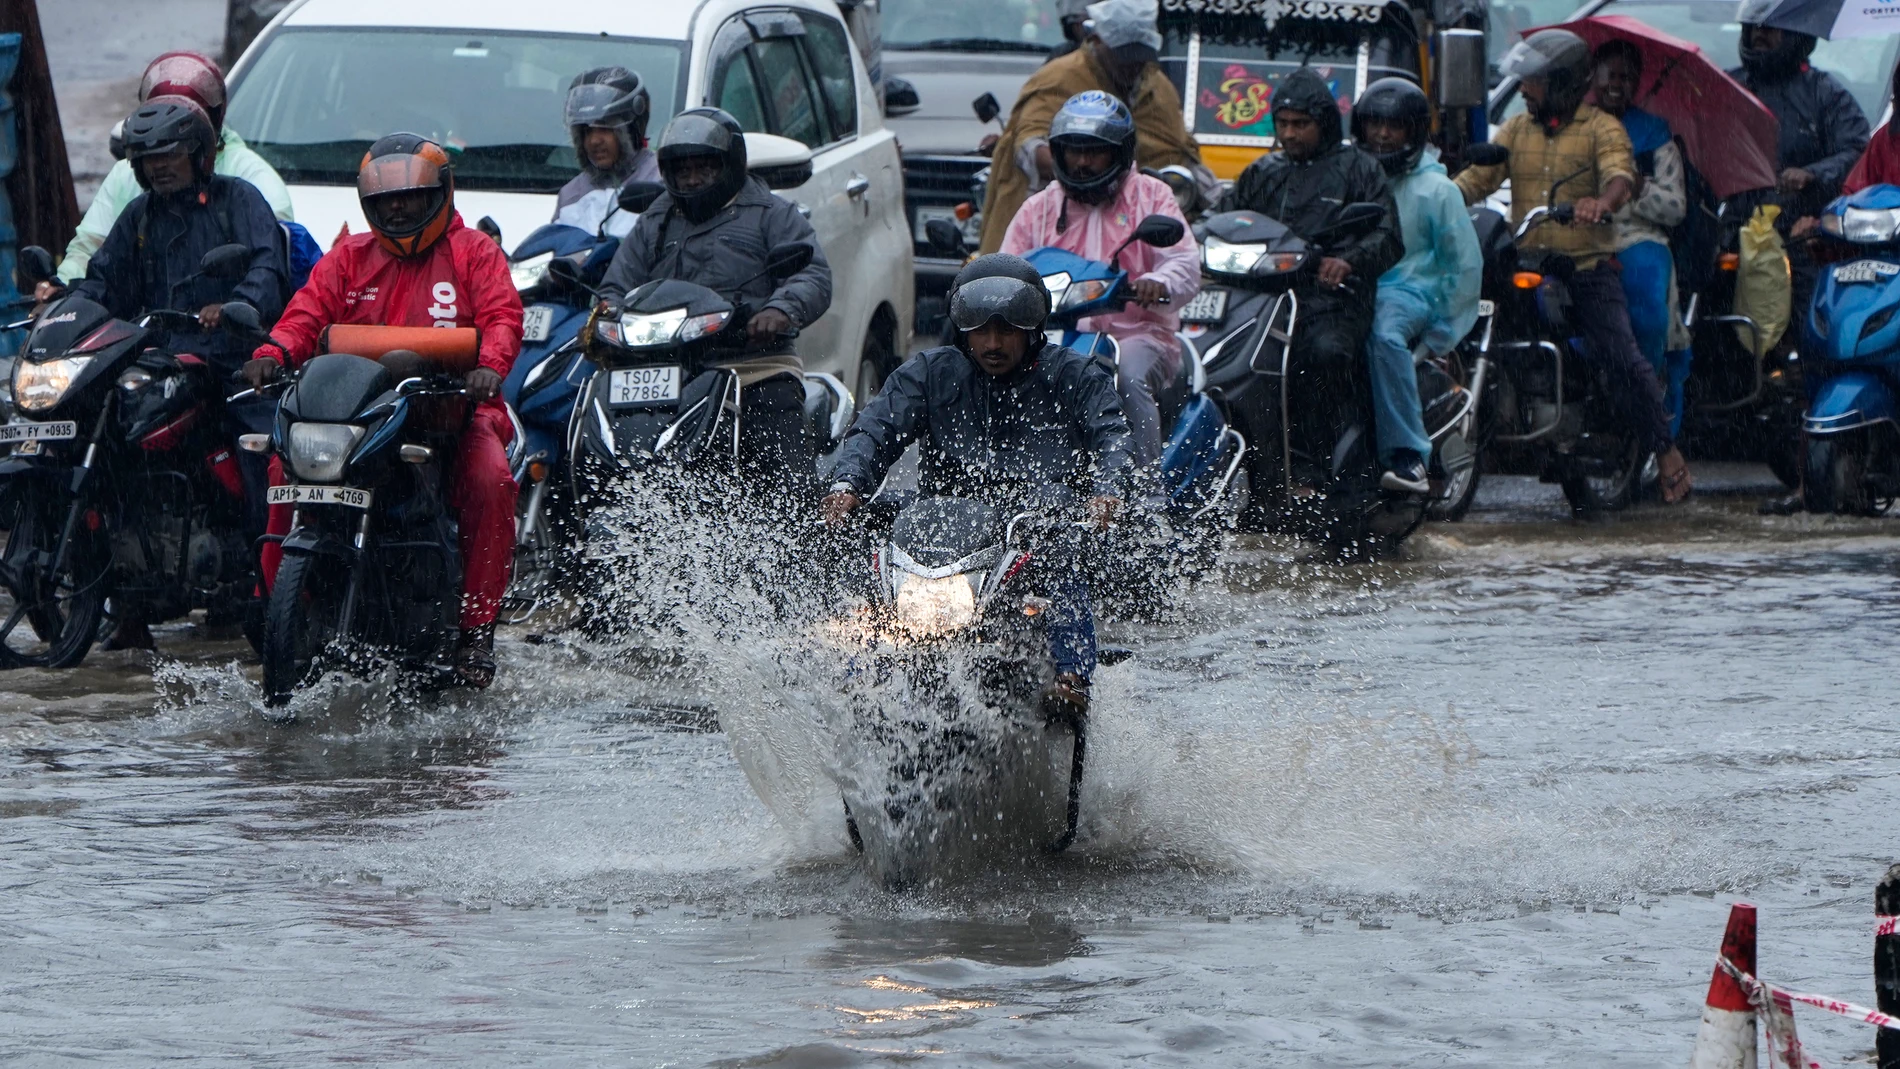 Motorists ride through a water logged street during rain in Hyderabad, India, Tuesday, Sept. 5, 2023. The monsoon season in India lasts from June to September. (AP Photo/Mahesh Kumar A.)